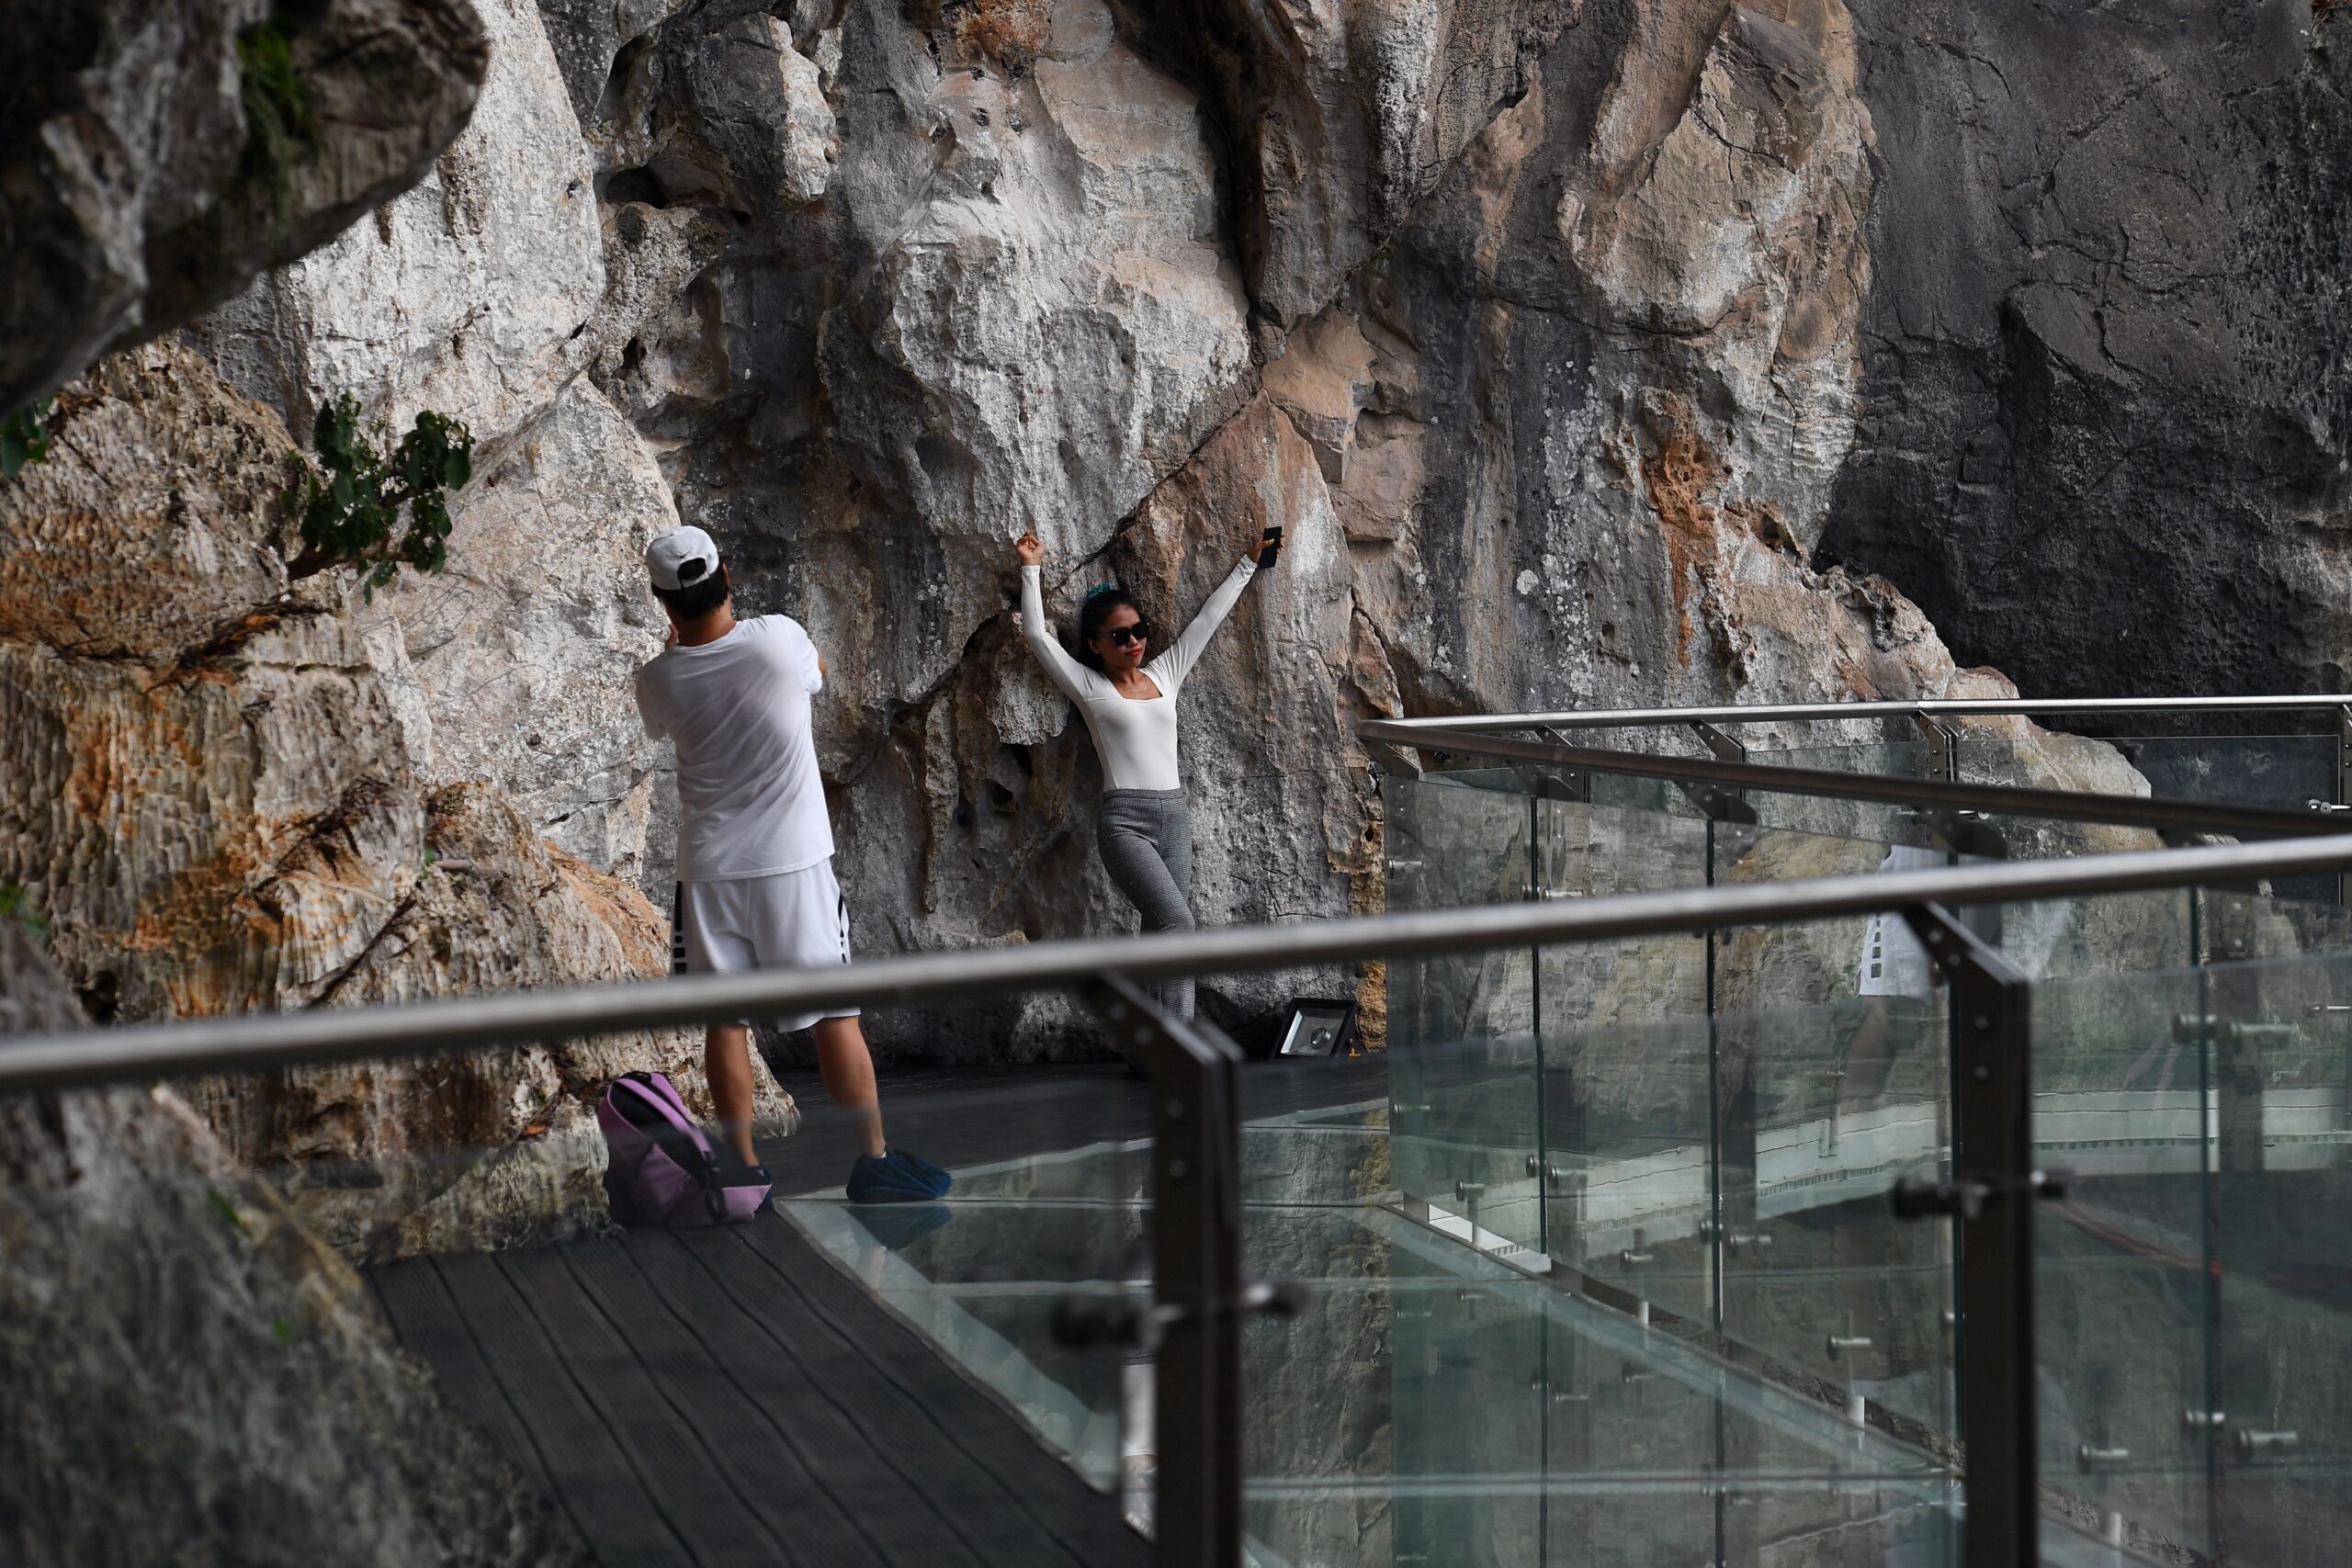 people stand on the Bach Long glass bridge in the Moc Chau district in Vietnam&#39;s Son La province